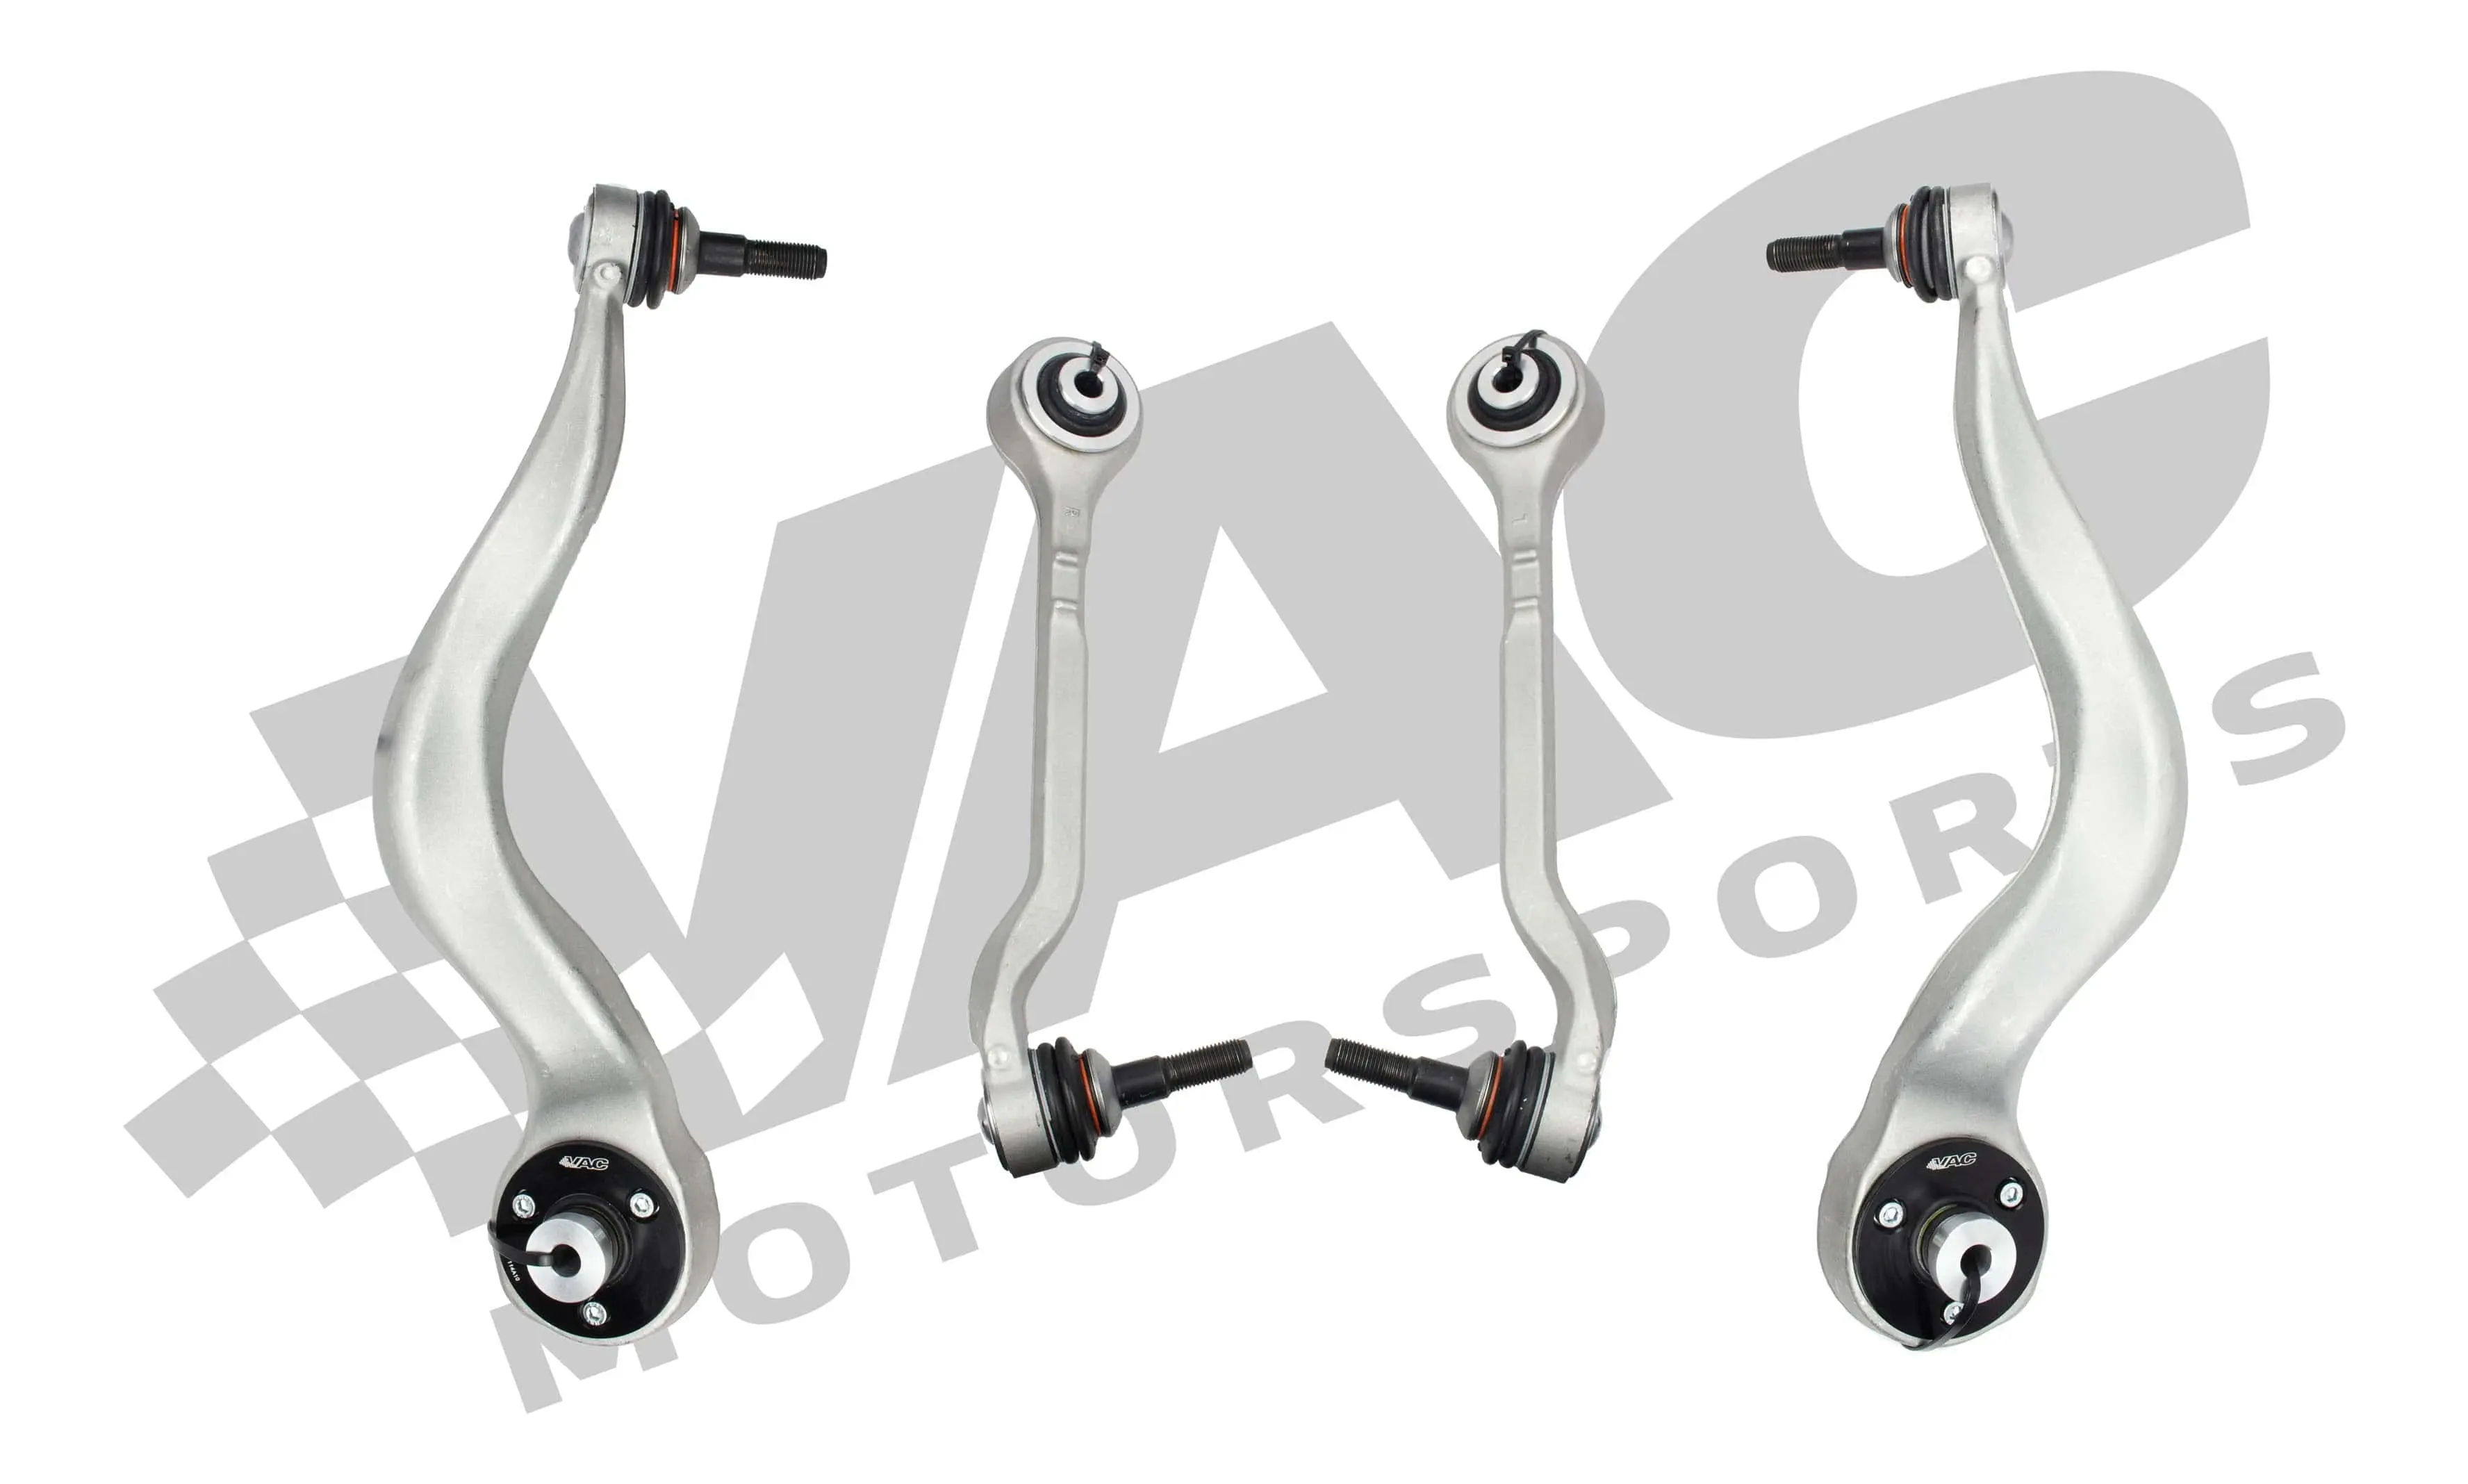 VAC - F3X FRONT CONTROL ARM SET (L&R) XDRIVE ONLY (Upper & Lower) (Monoballs) - Upper Control Arm Only